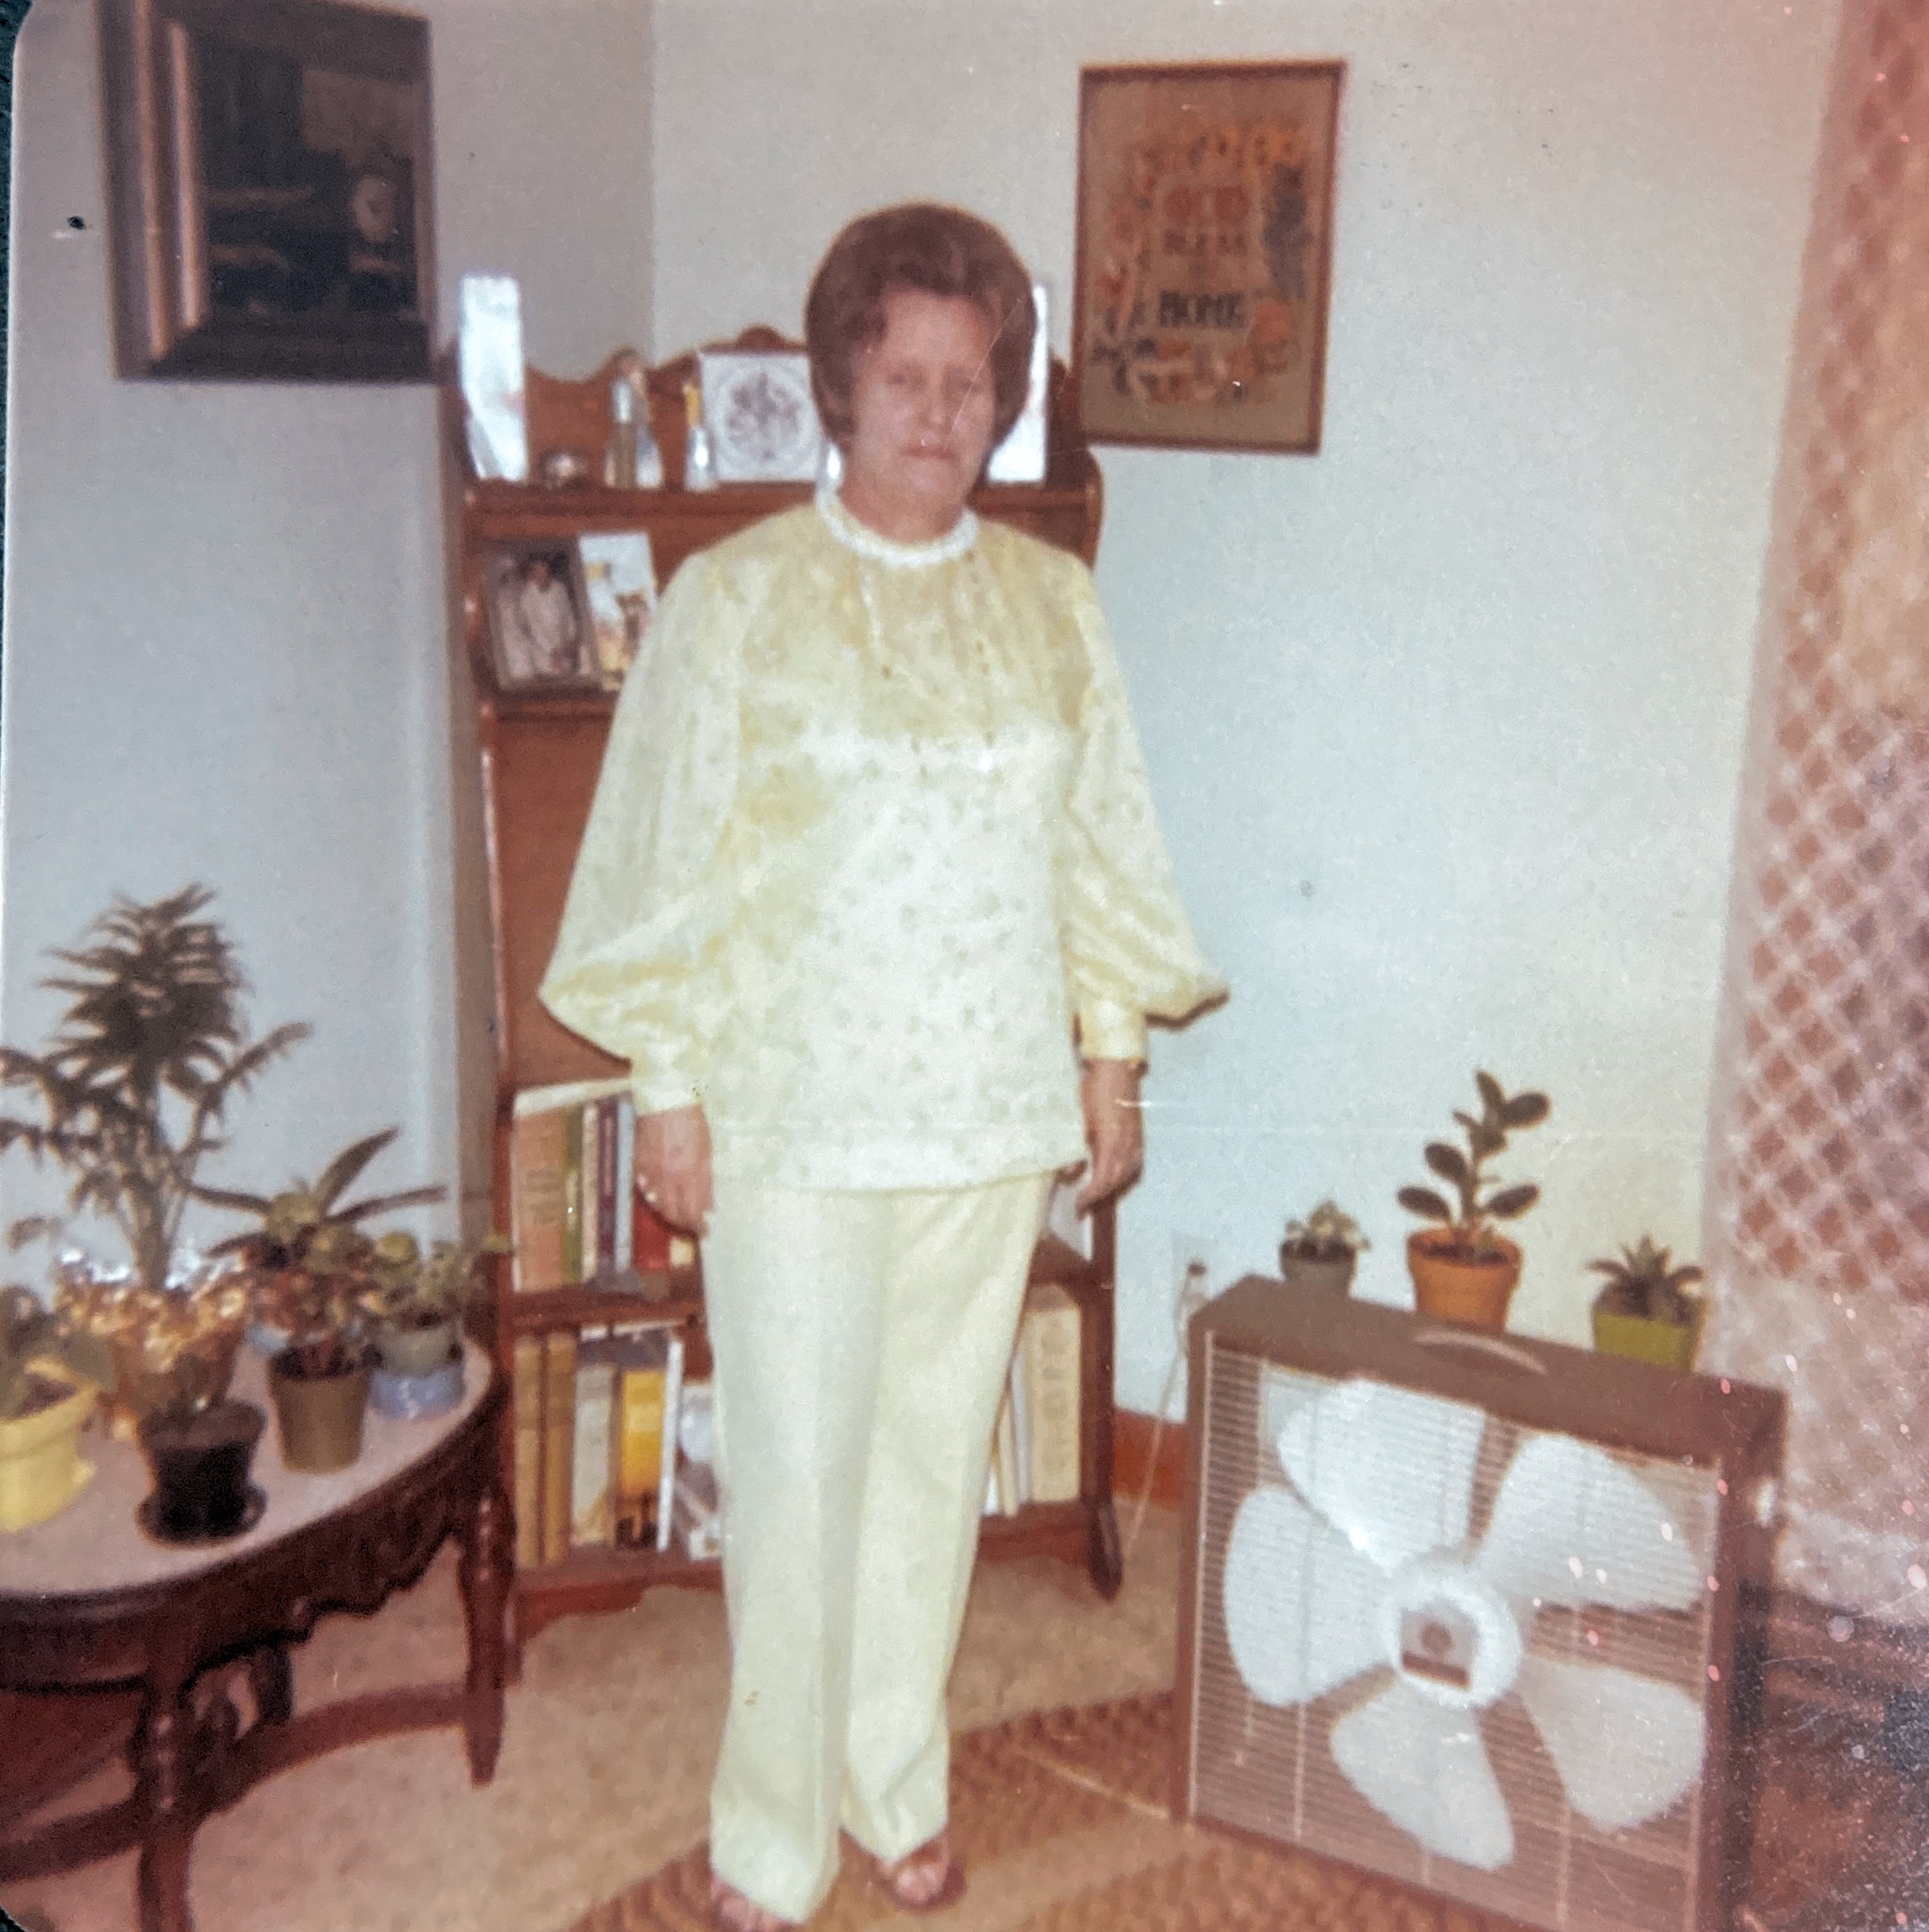 This is a picture of my beautiful mother and on the back it says her name and it says it was taken around 1965 or 68 and then she wrote I made the complete outfit! And then 39 years old. Bless her heart she was so talented in so many ways!